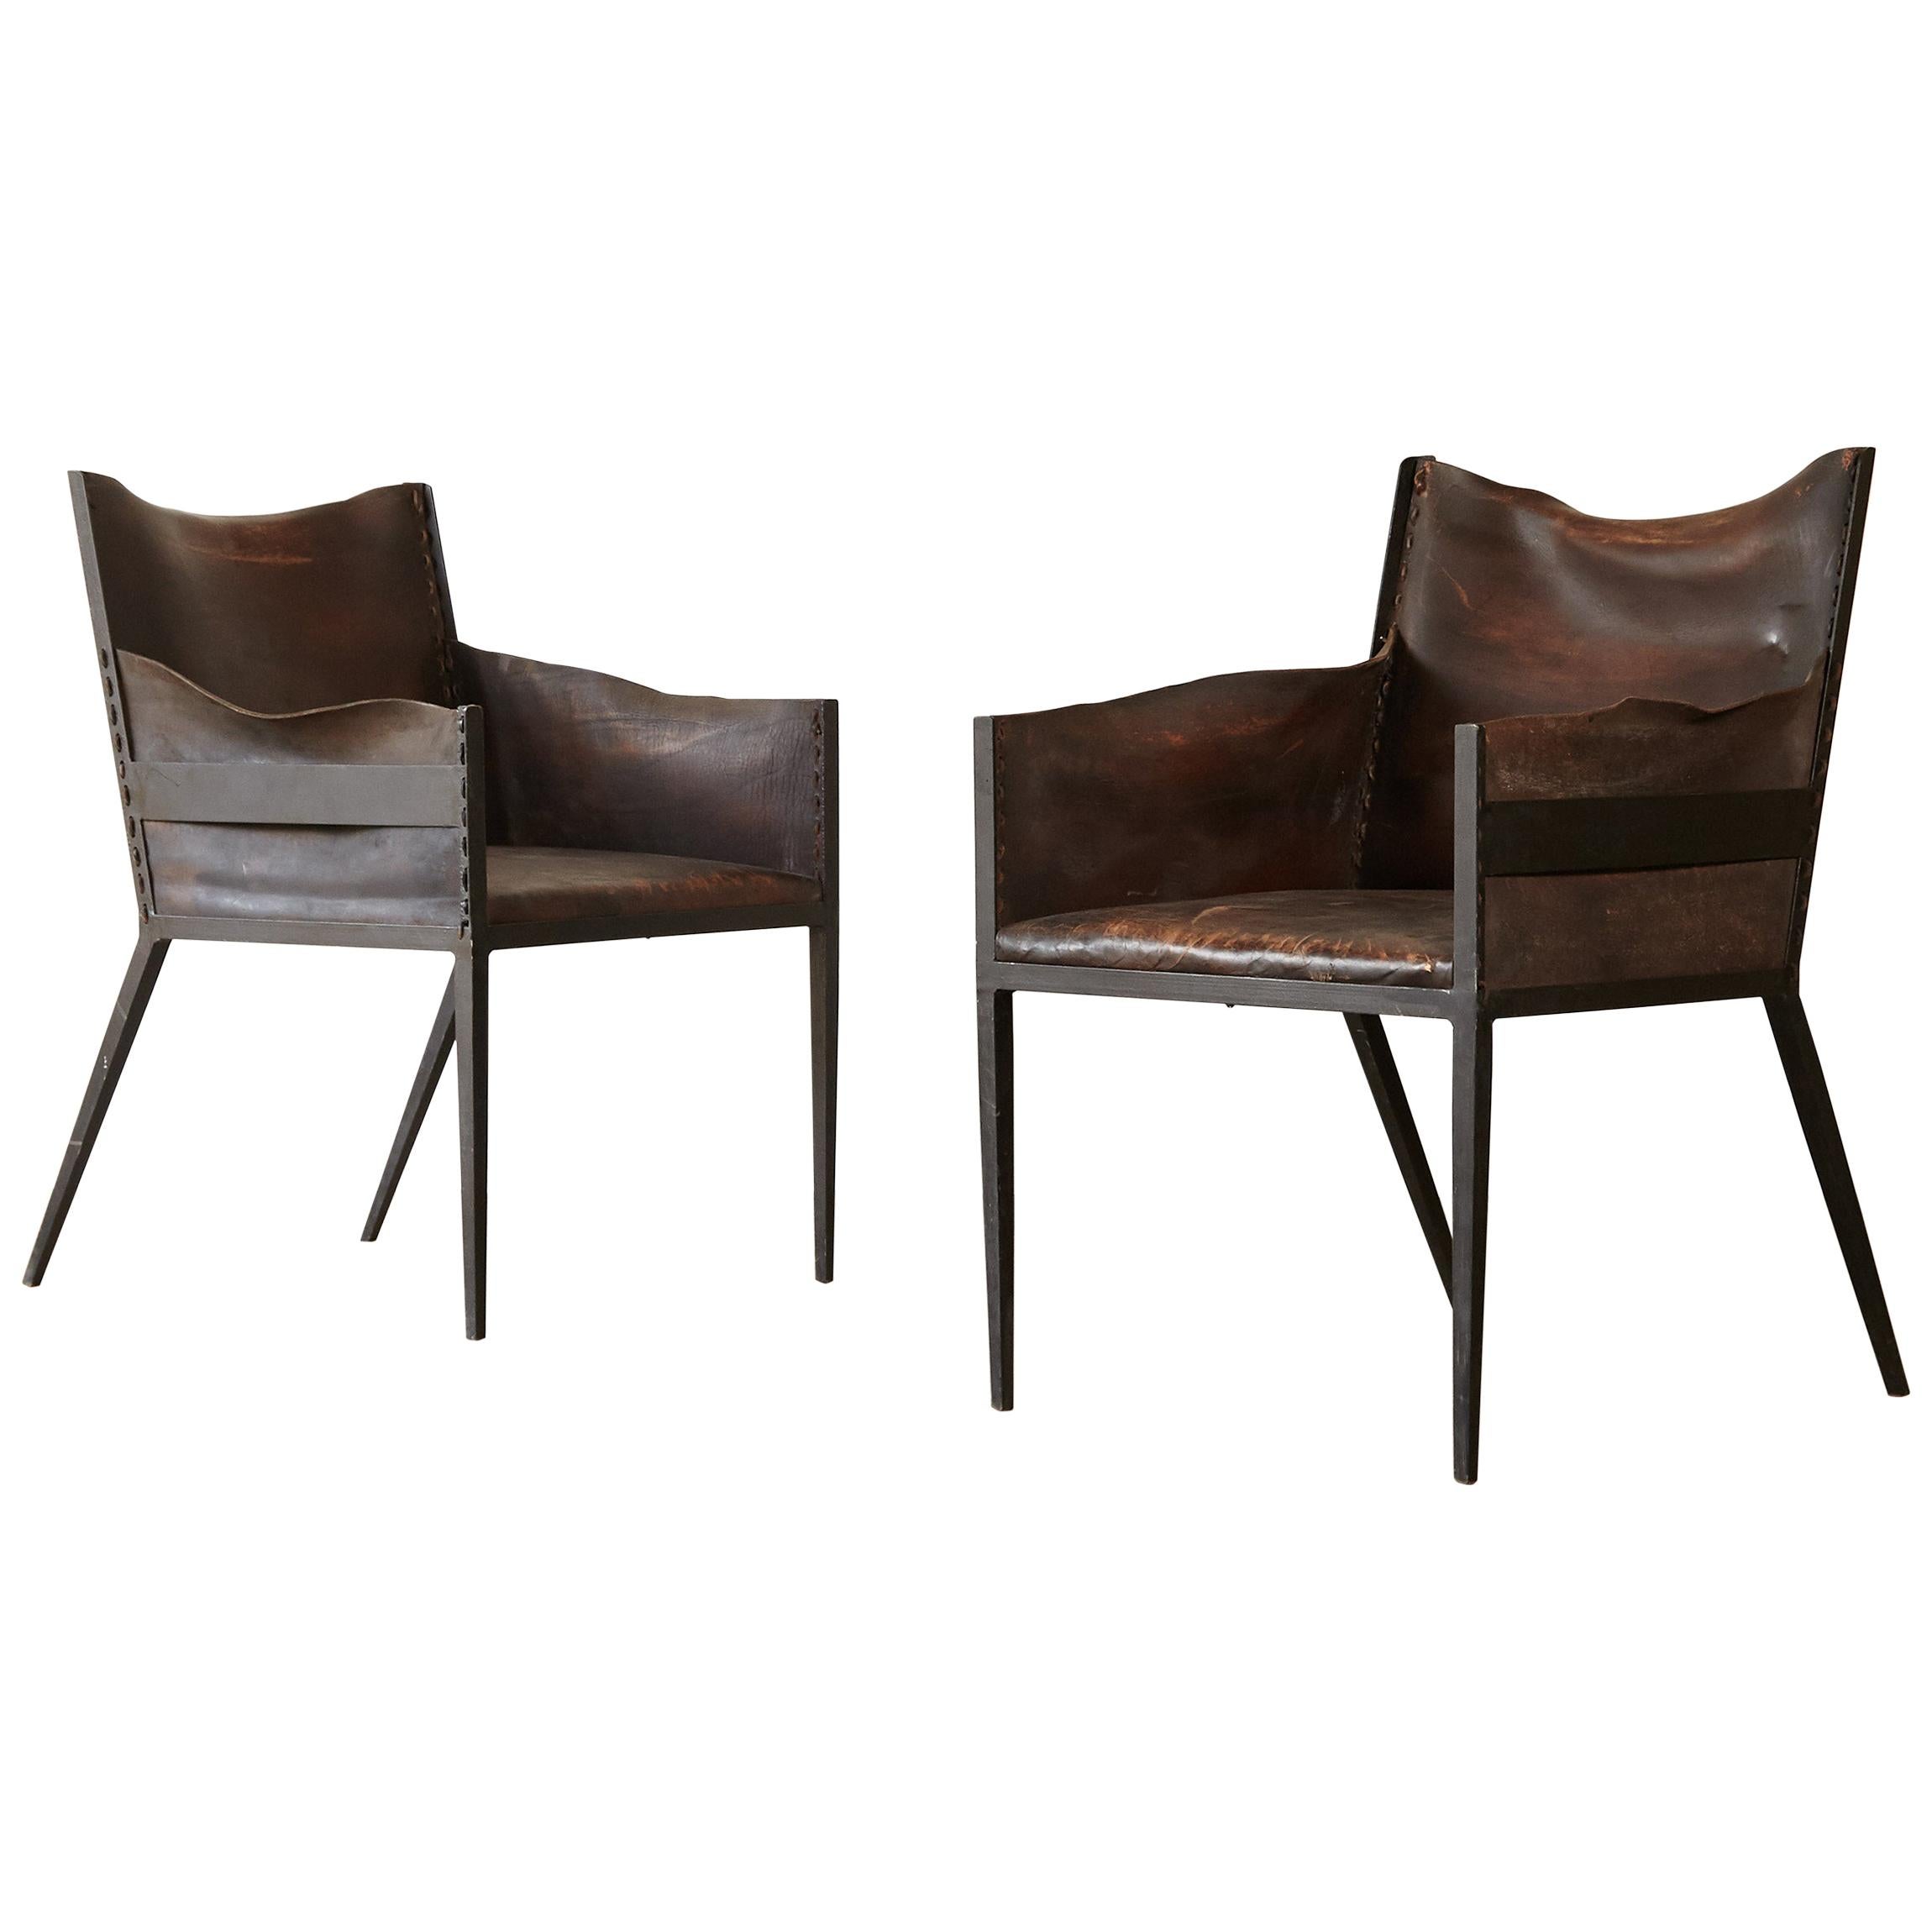 Pair of Iron and Leather Chairs